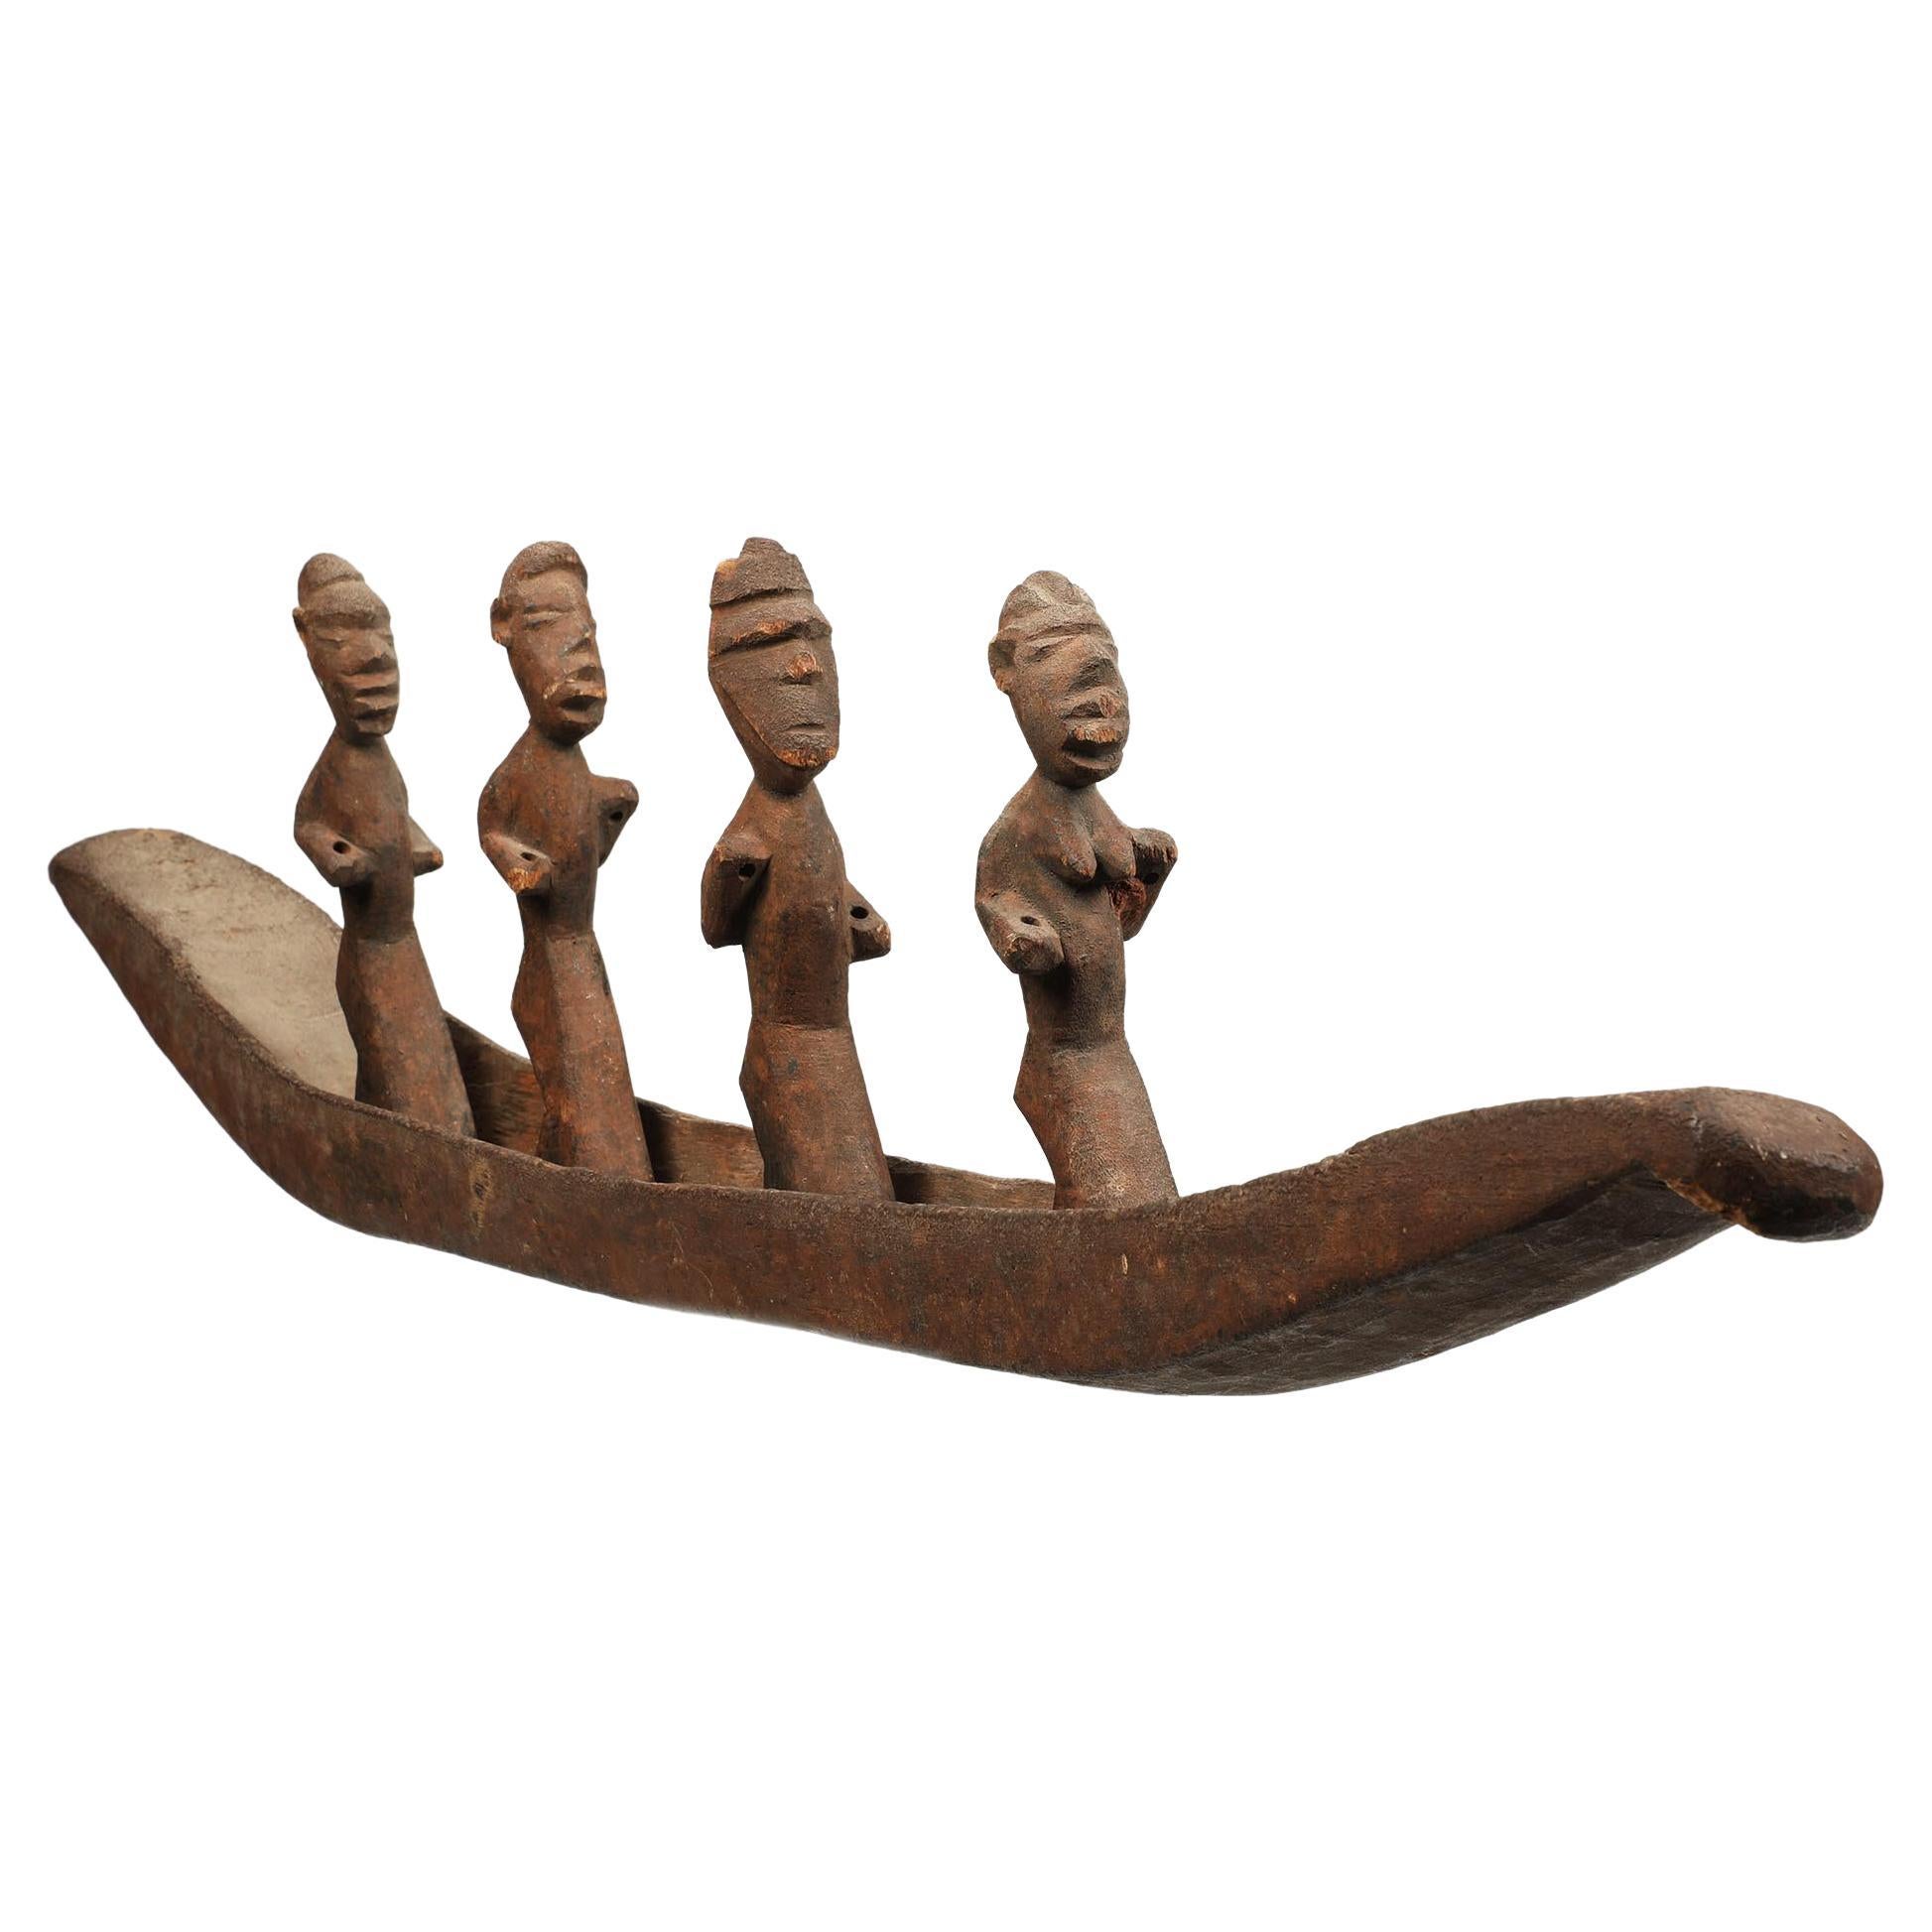 Salampasu Ritual Wood Boat with Four Masked Figure and Attendants